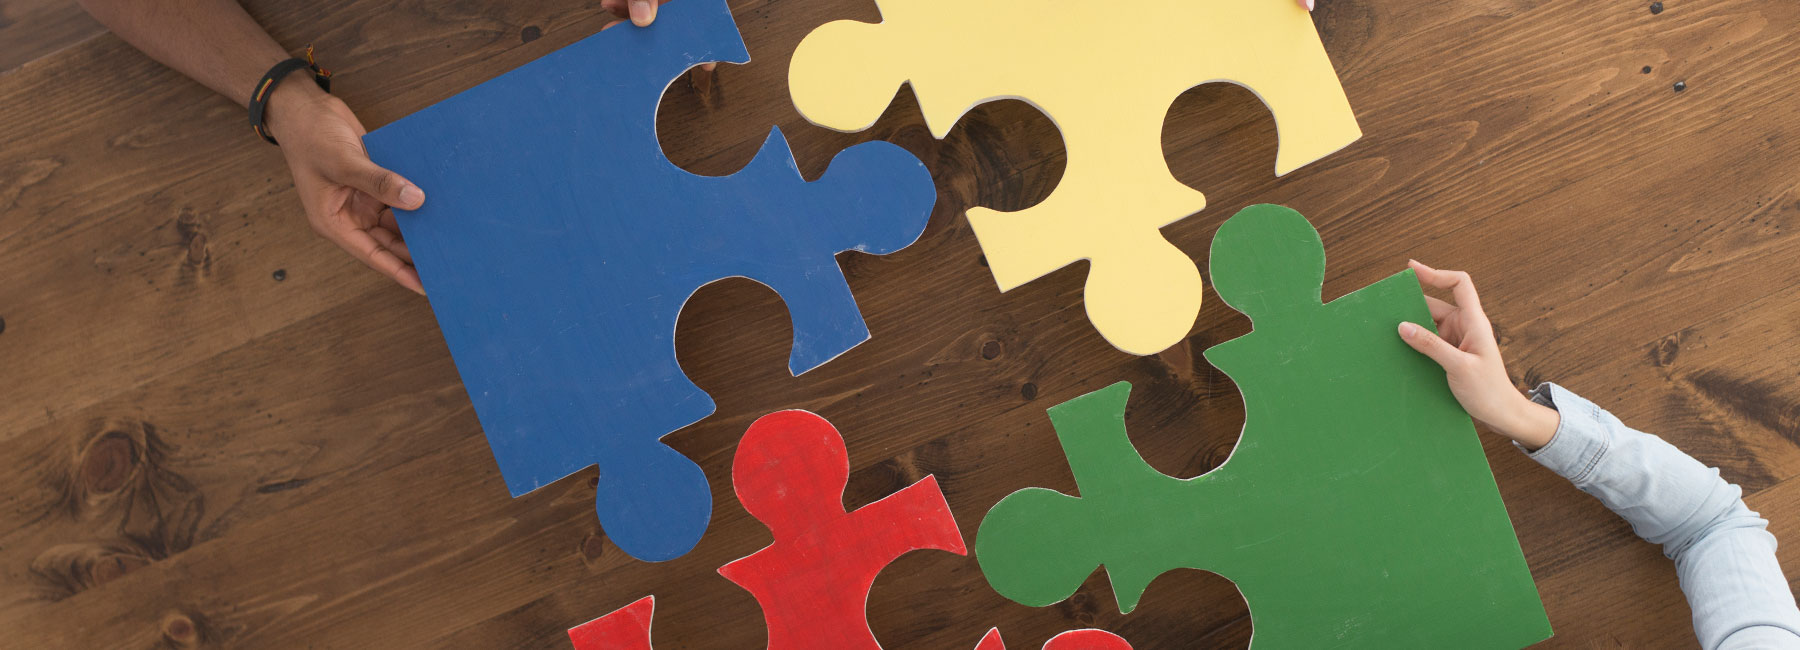 Four people putting large puzzle pieces together